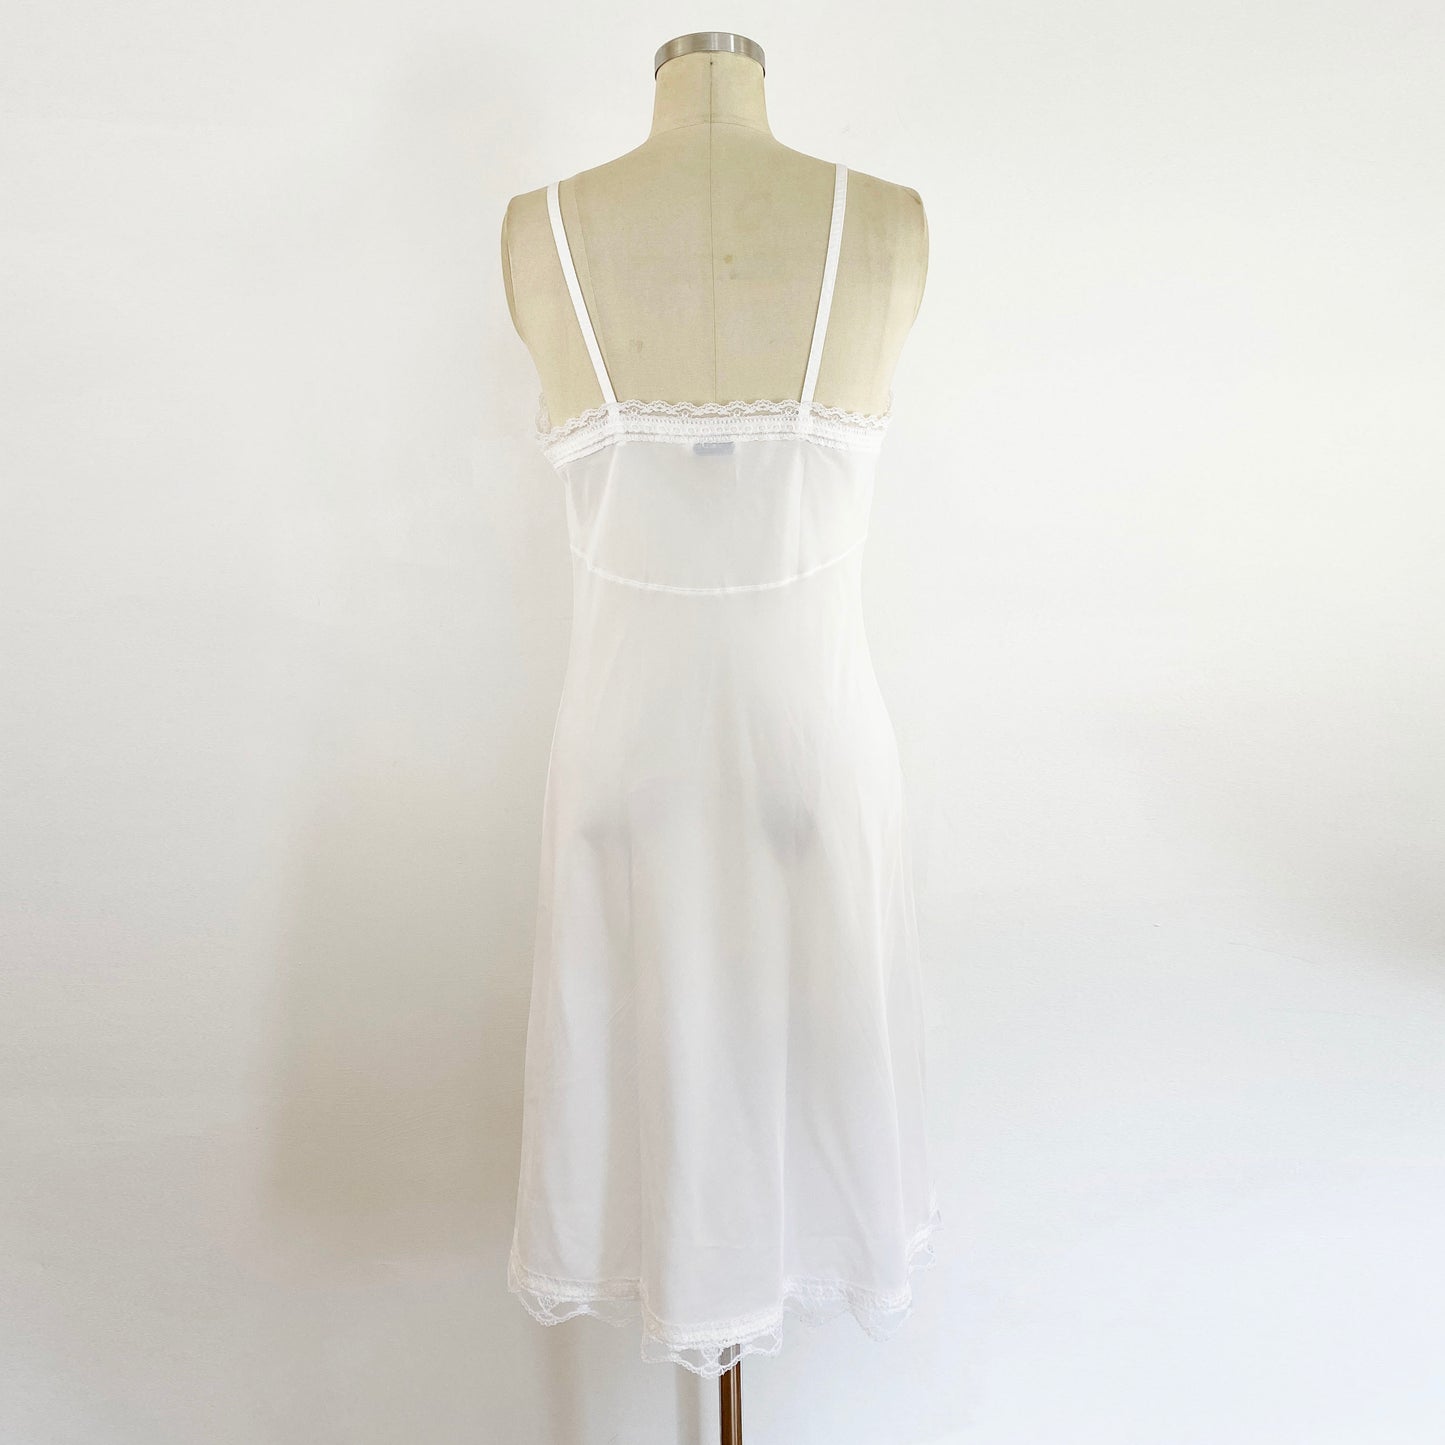 1980s Christian Dior White Embroidered and Lace Slip Dress Chemise Lingerie Nightgown / Size 36 Medium 8